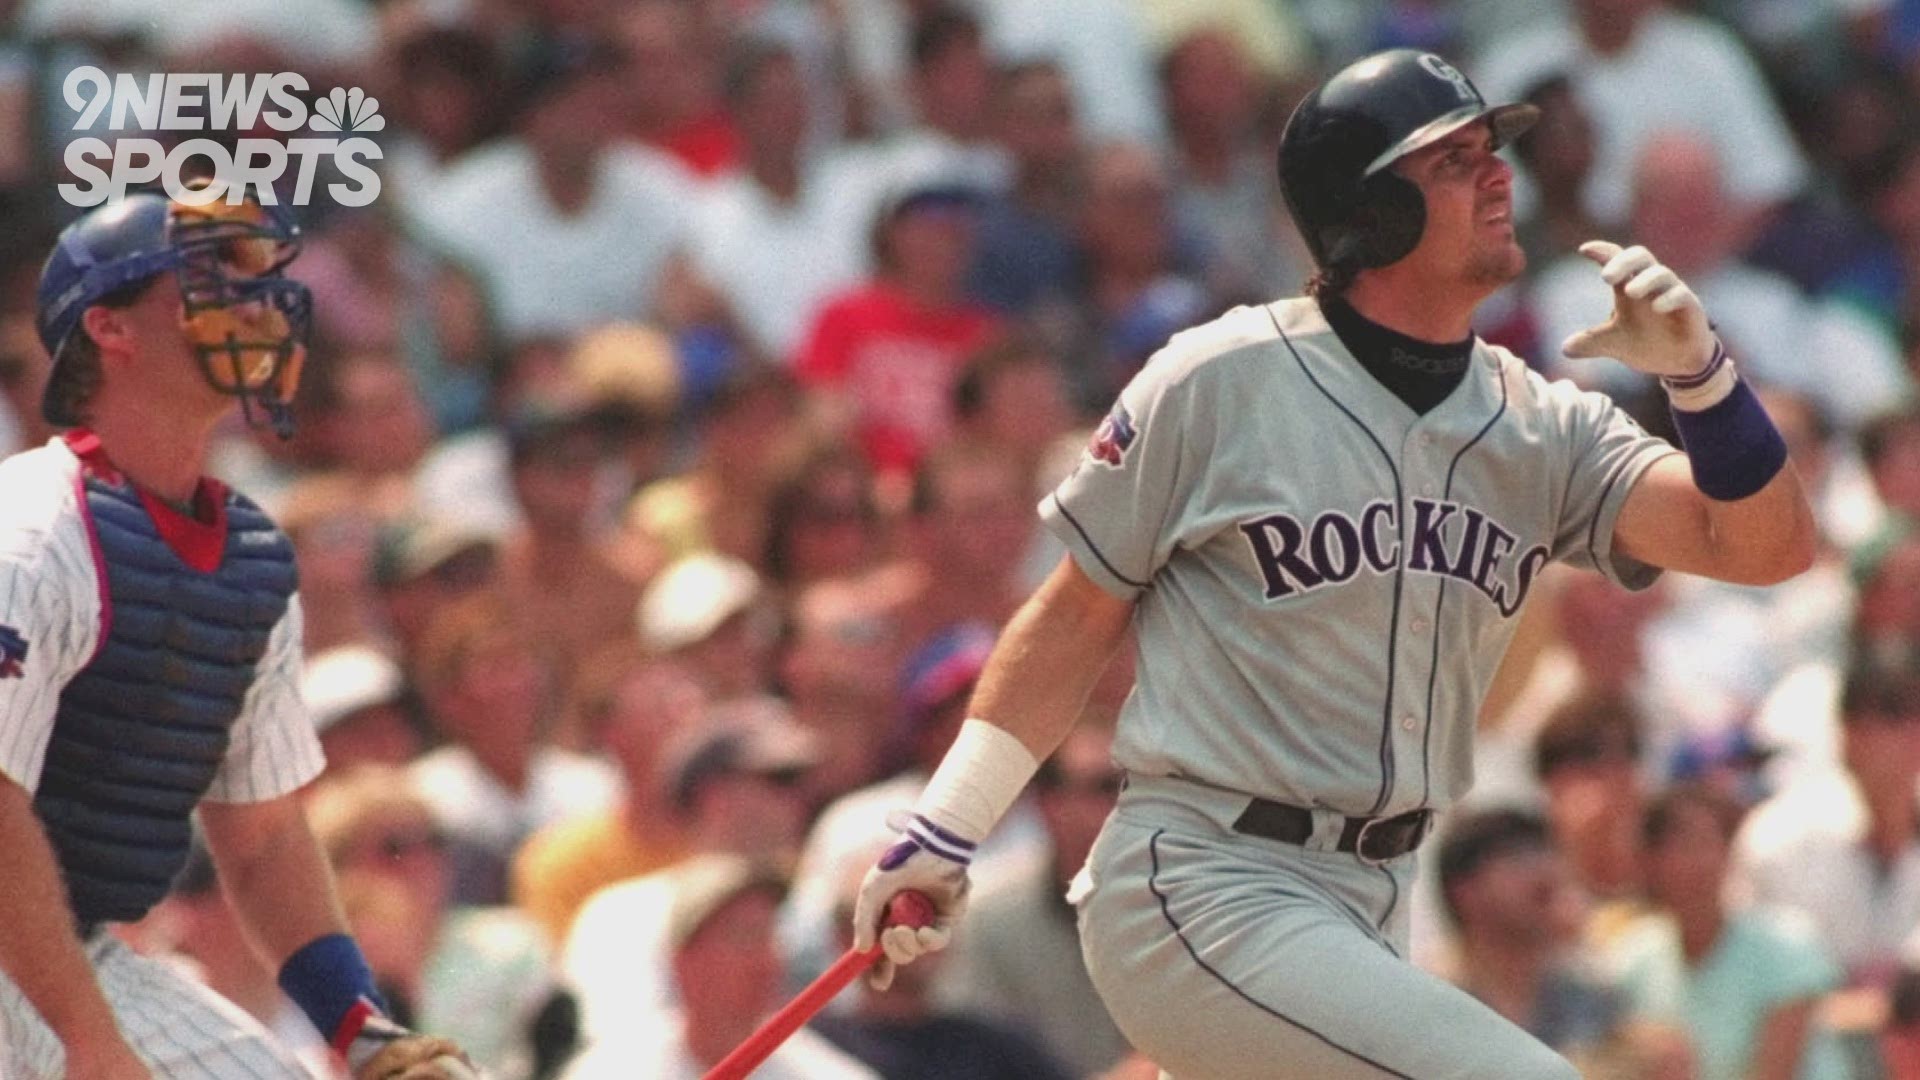 The Hall of Fame elect was supposed to be honored at Coors Field before a game against the Cardinals.